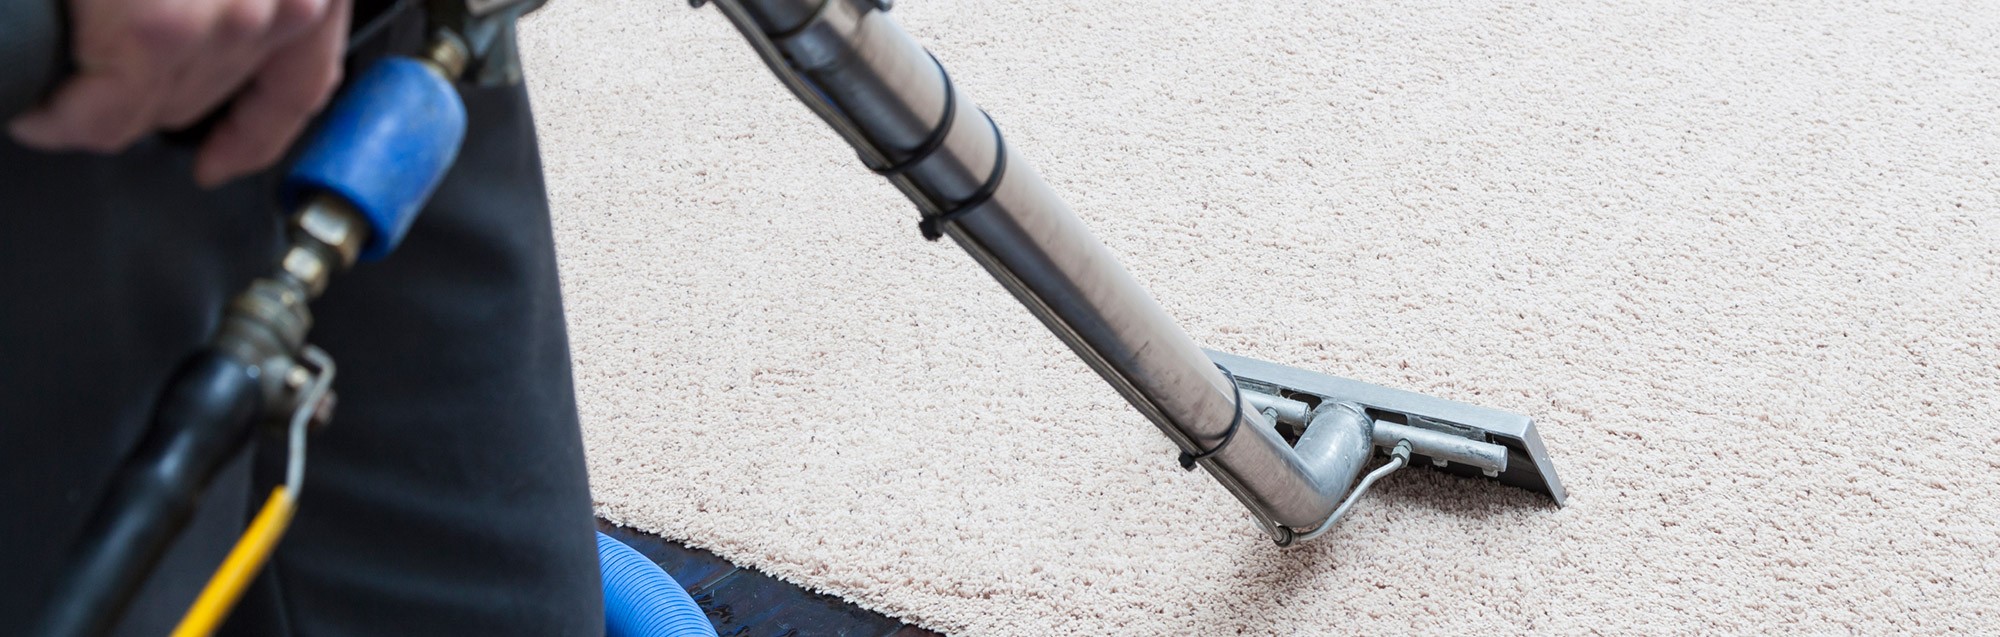 Carpet cleaning 3